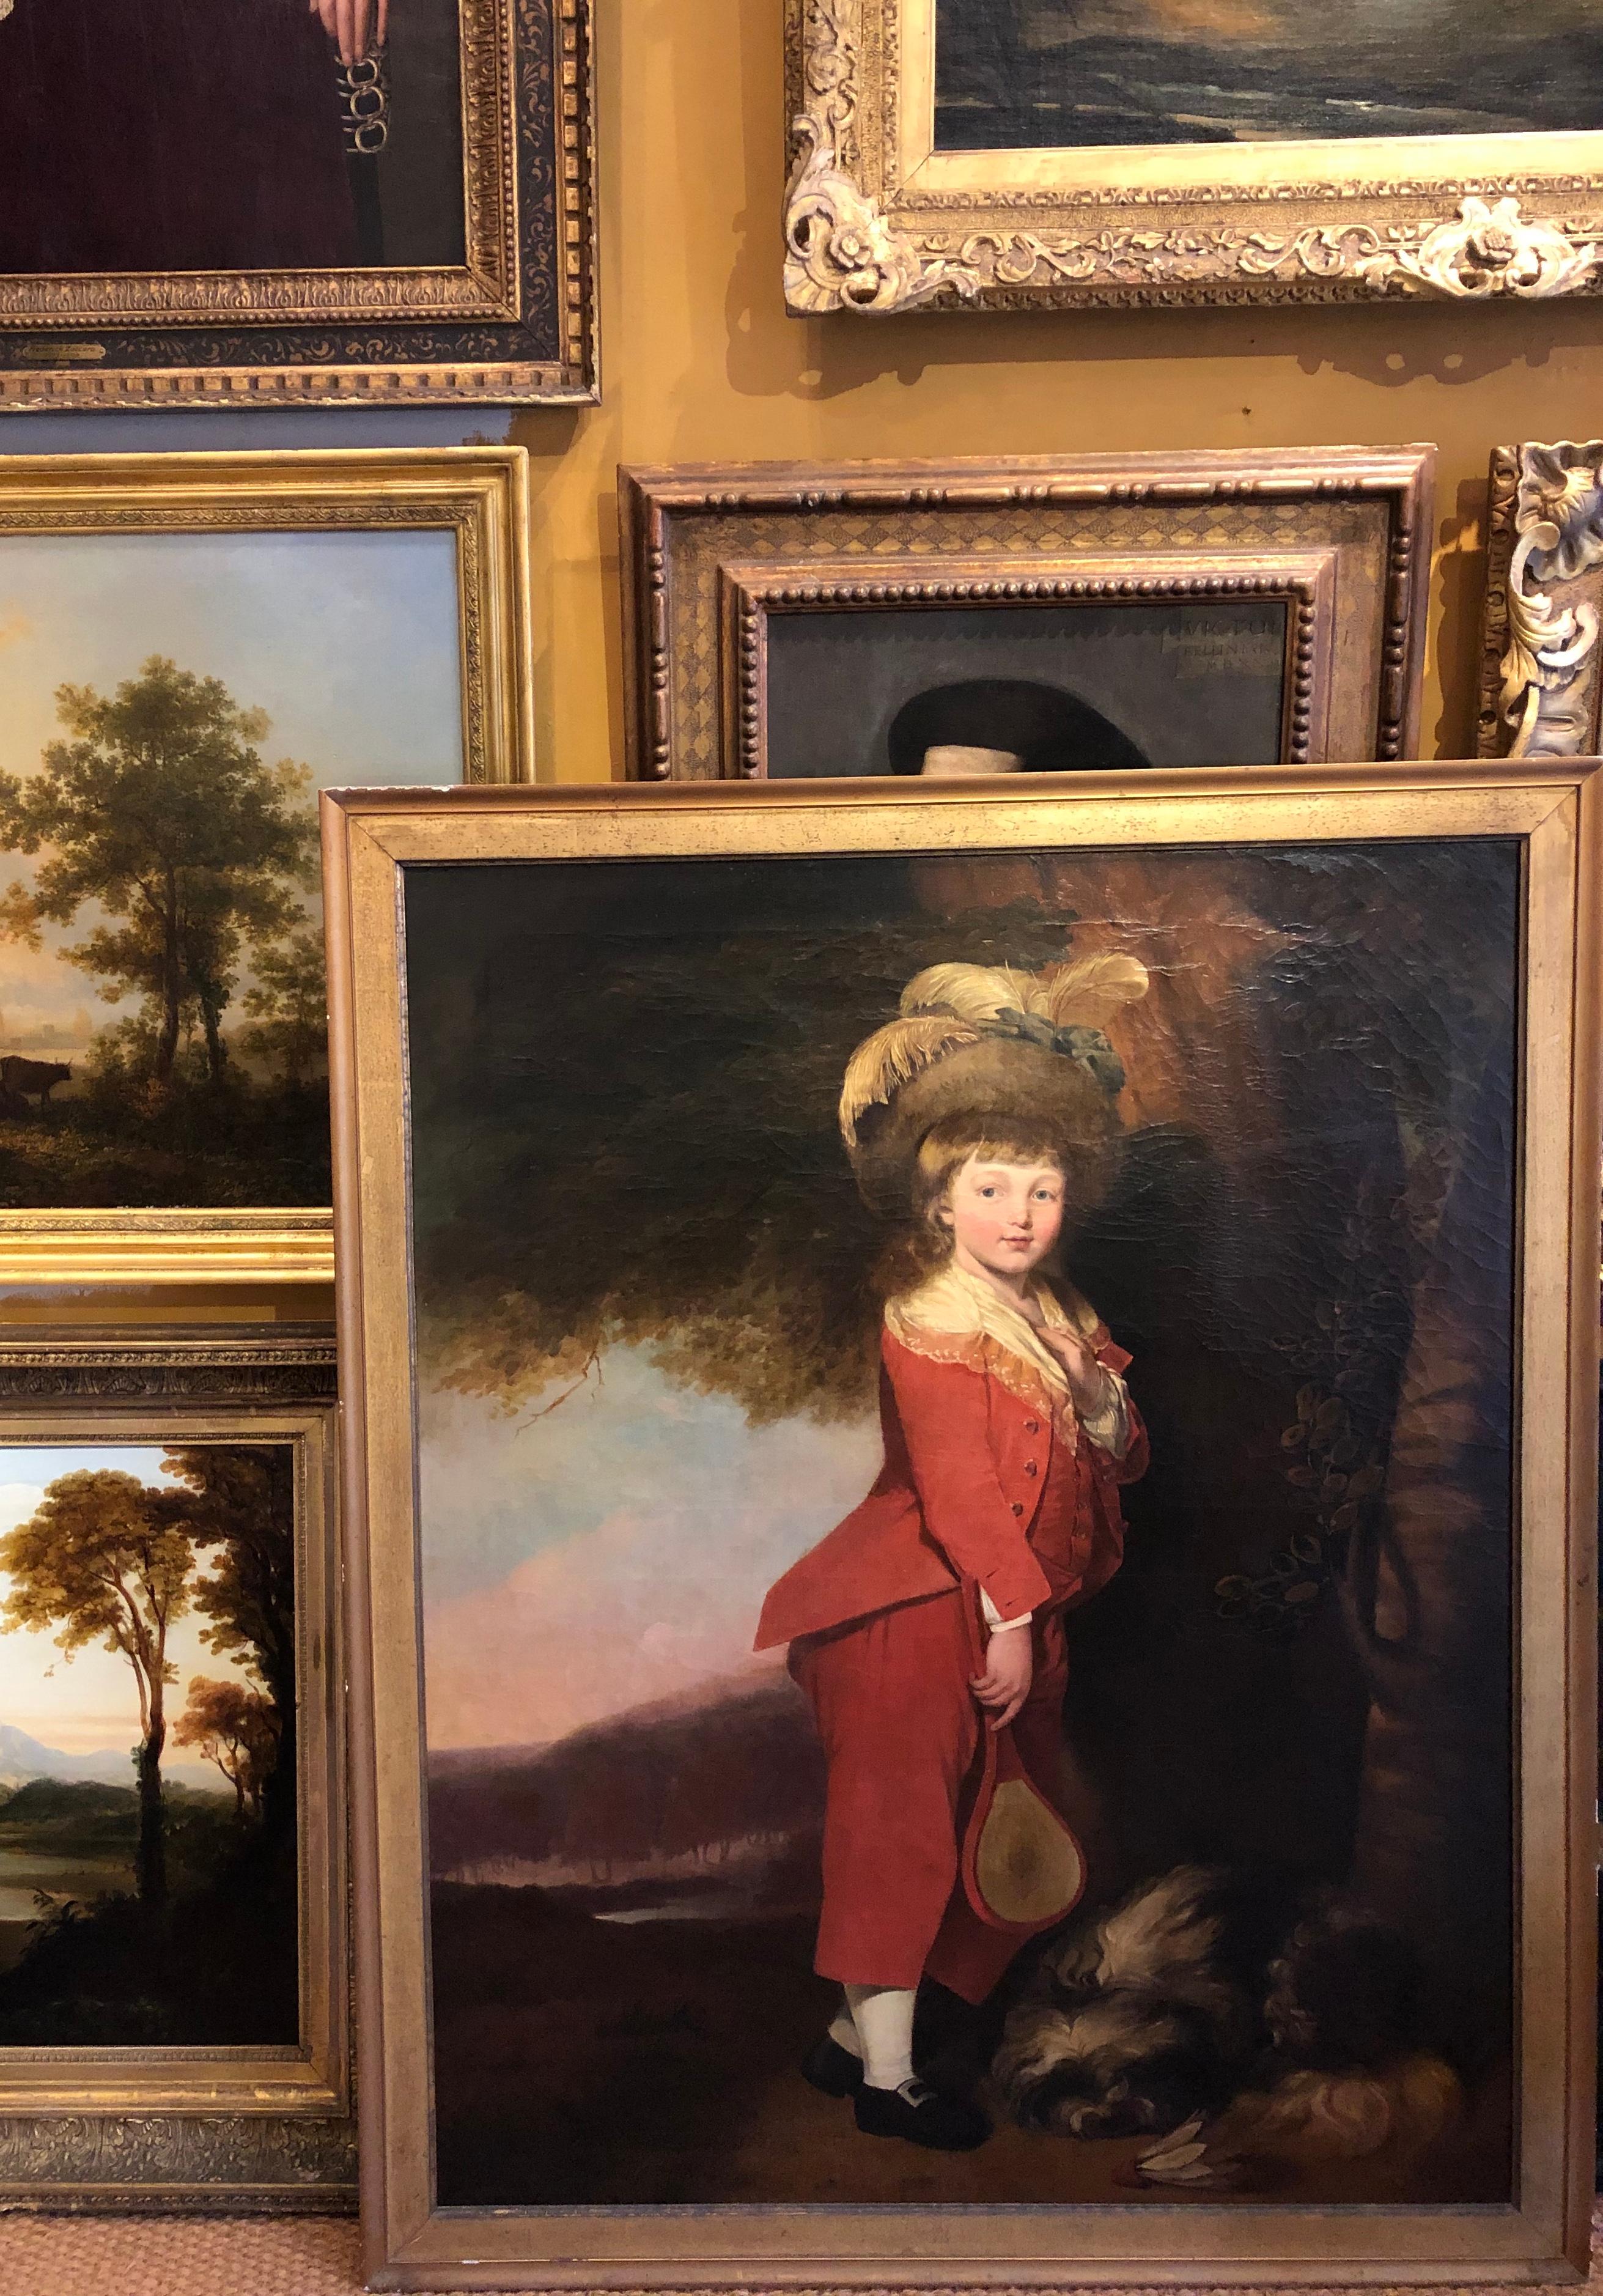 English School, early to mid-19th century
Full-length Portrait of a Boy in Red, holding a badminton racquet beneath a tree, a dog asleep at his feet with a shuttlecock 
oil on canvas
in plain gilt frame
49 1/2 x 39 1/4 inches, unframed
55 x 45